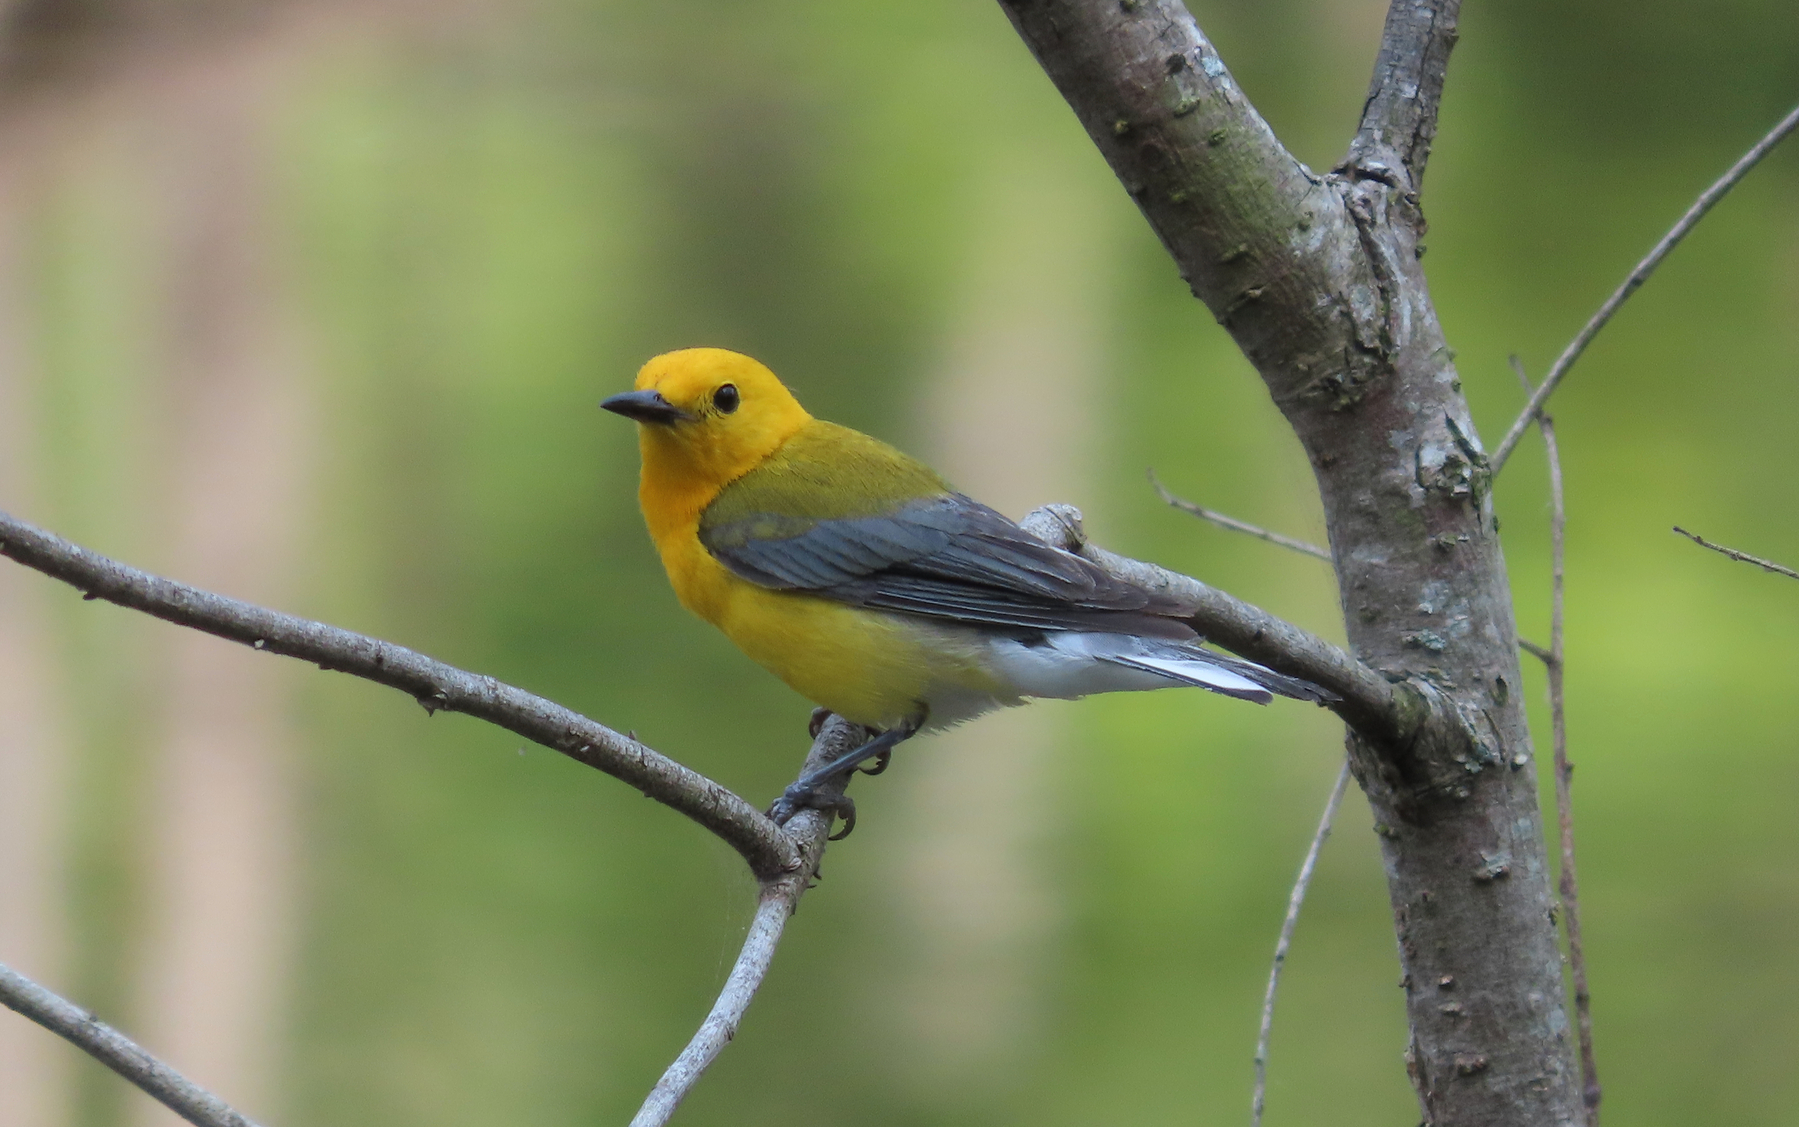 A bright yellow bird, the prothonotary warbler sitting on a branch